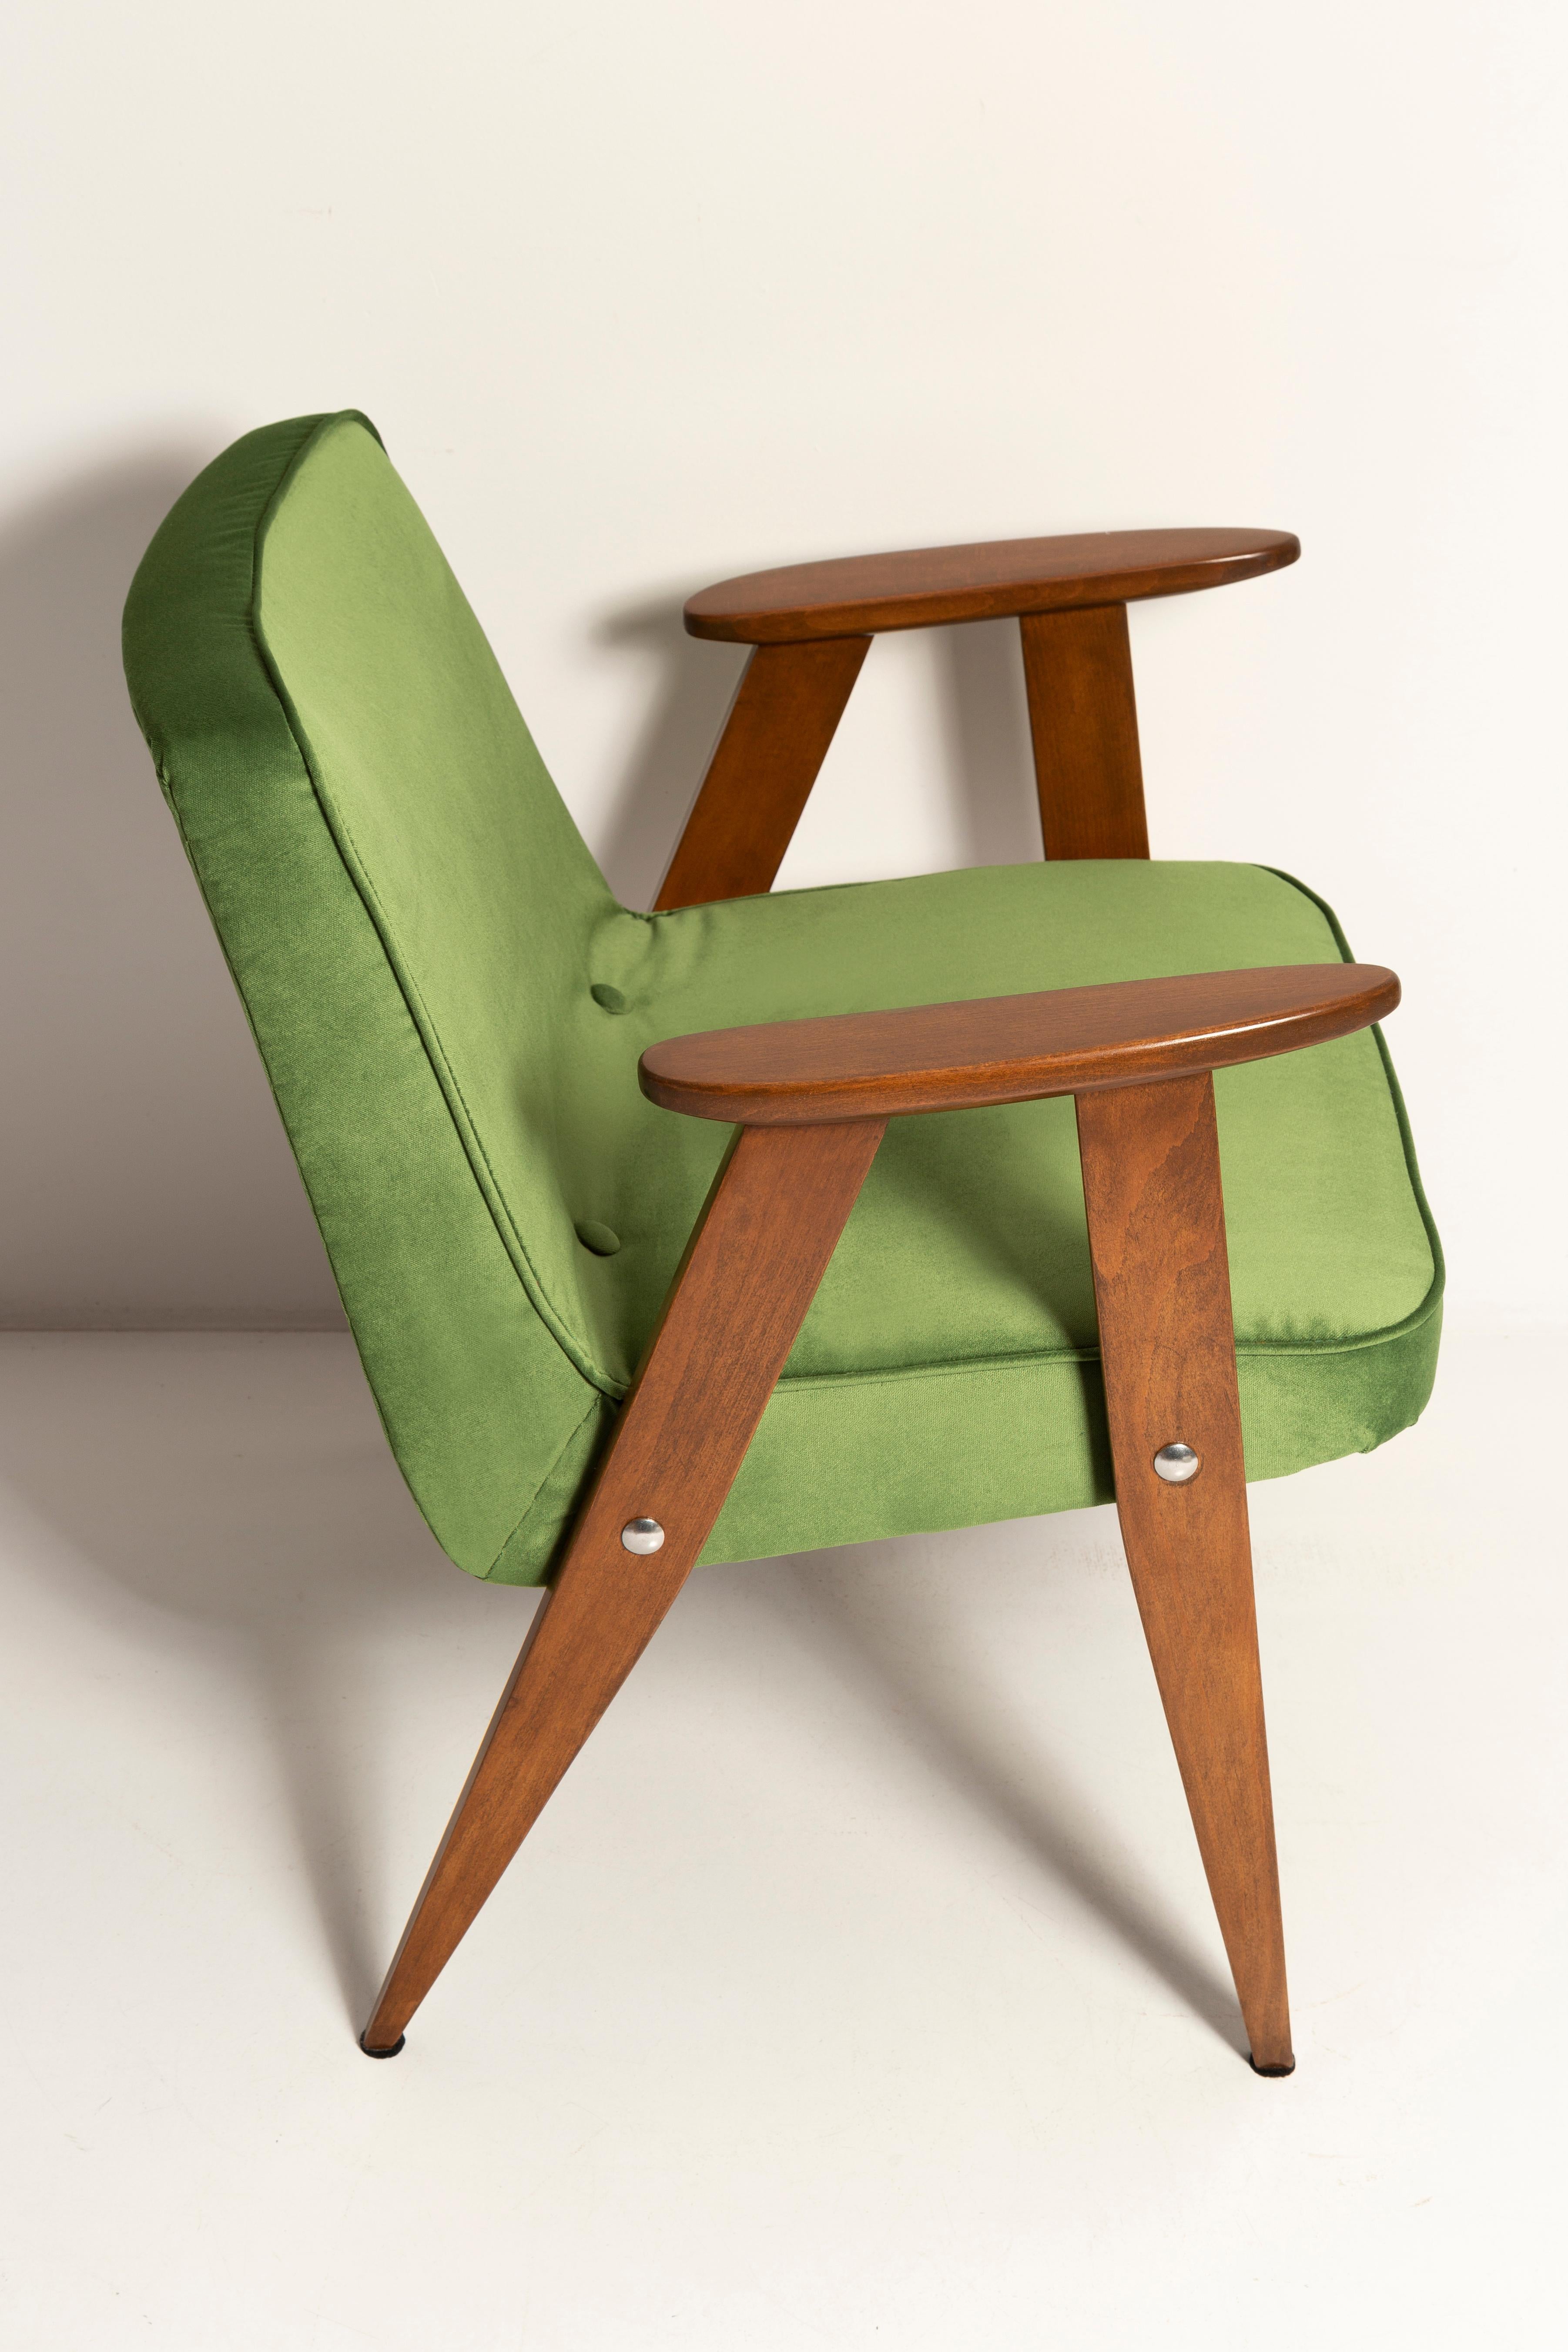 Hand-Crafted Mid Century 366 Armchair in Green Velvet, by Jozef Chierowski, Europe, 1960s For Sale